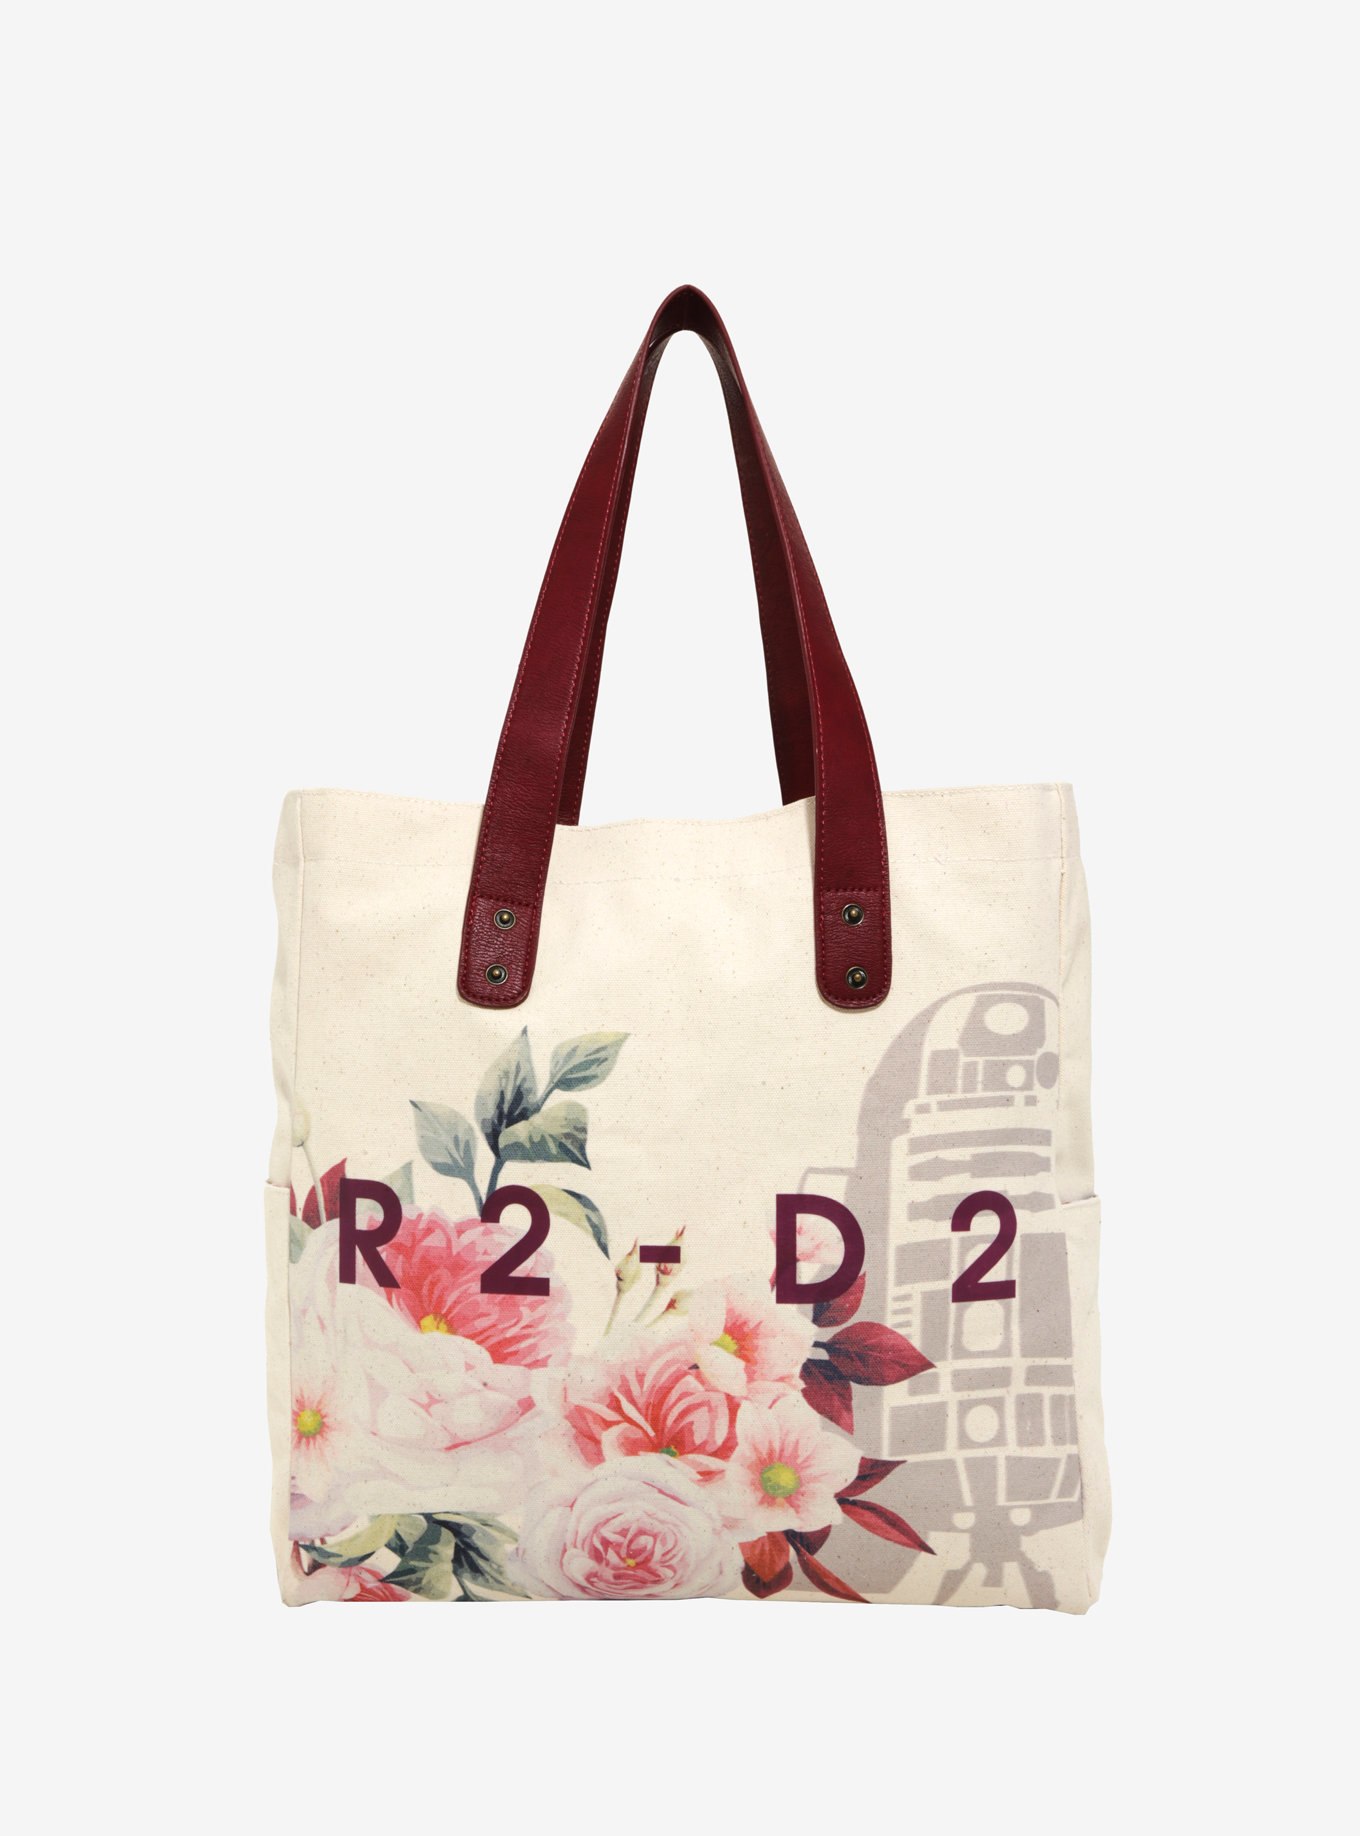 Loungefly x Star Wars R2-D2 Floral Tote Bag at Box Lunch